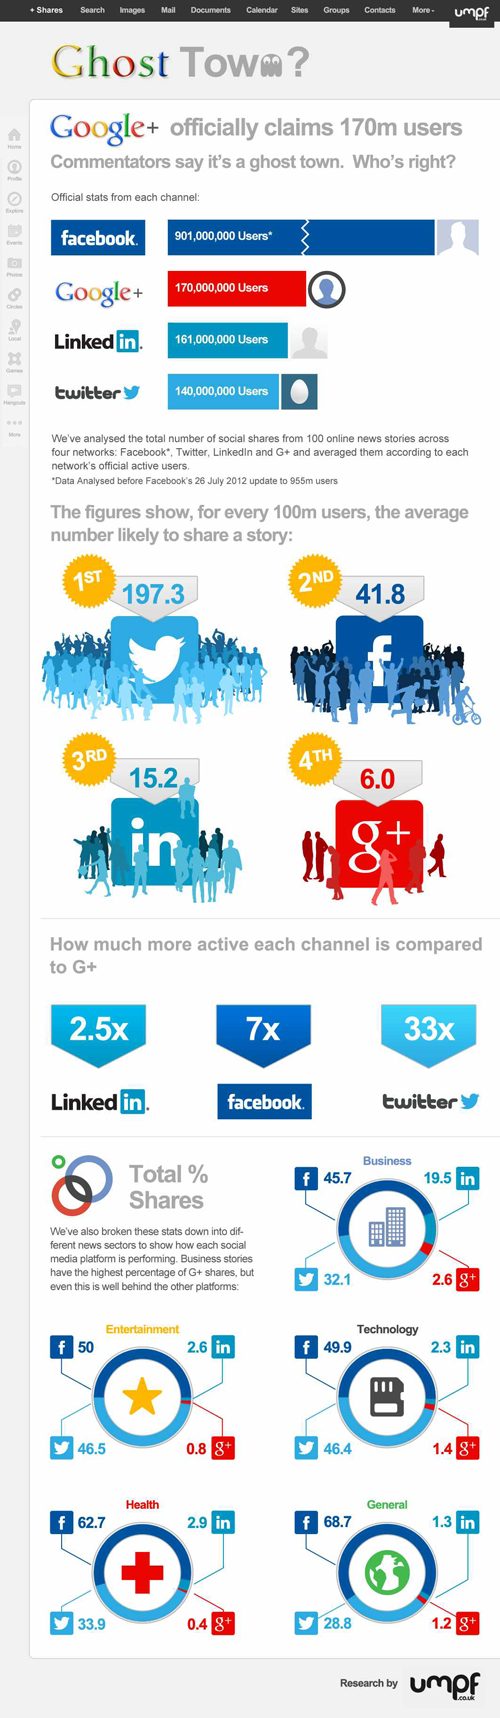 Google Plus Ghost Town? G+ Social Shares Lowest Compared to Facebook, Twitter And Even LinkedIn